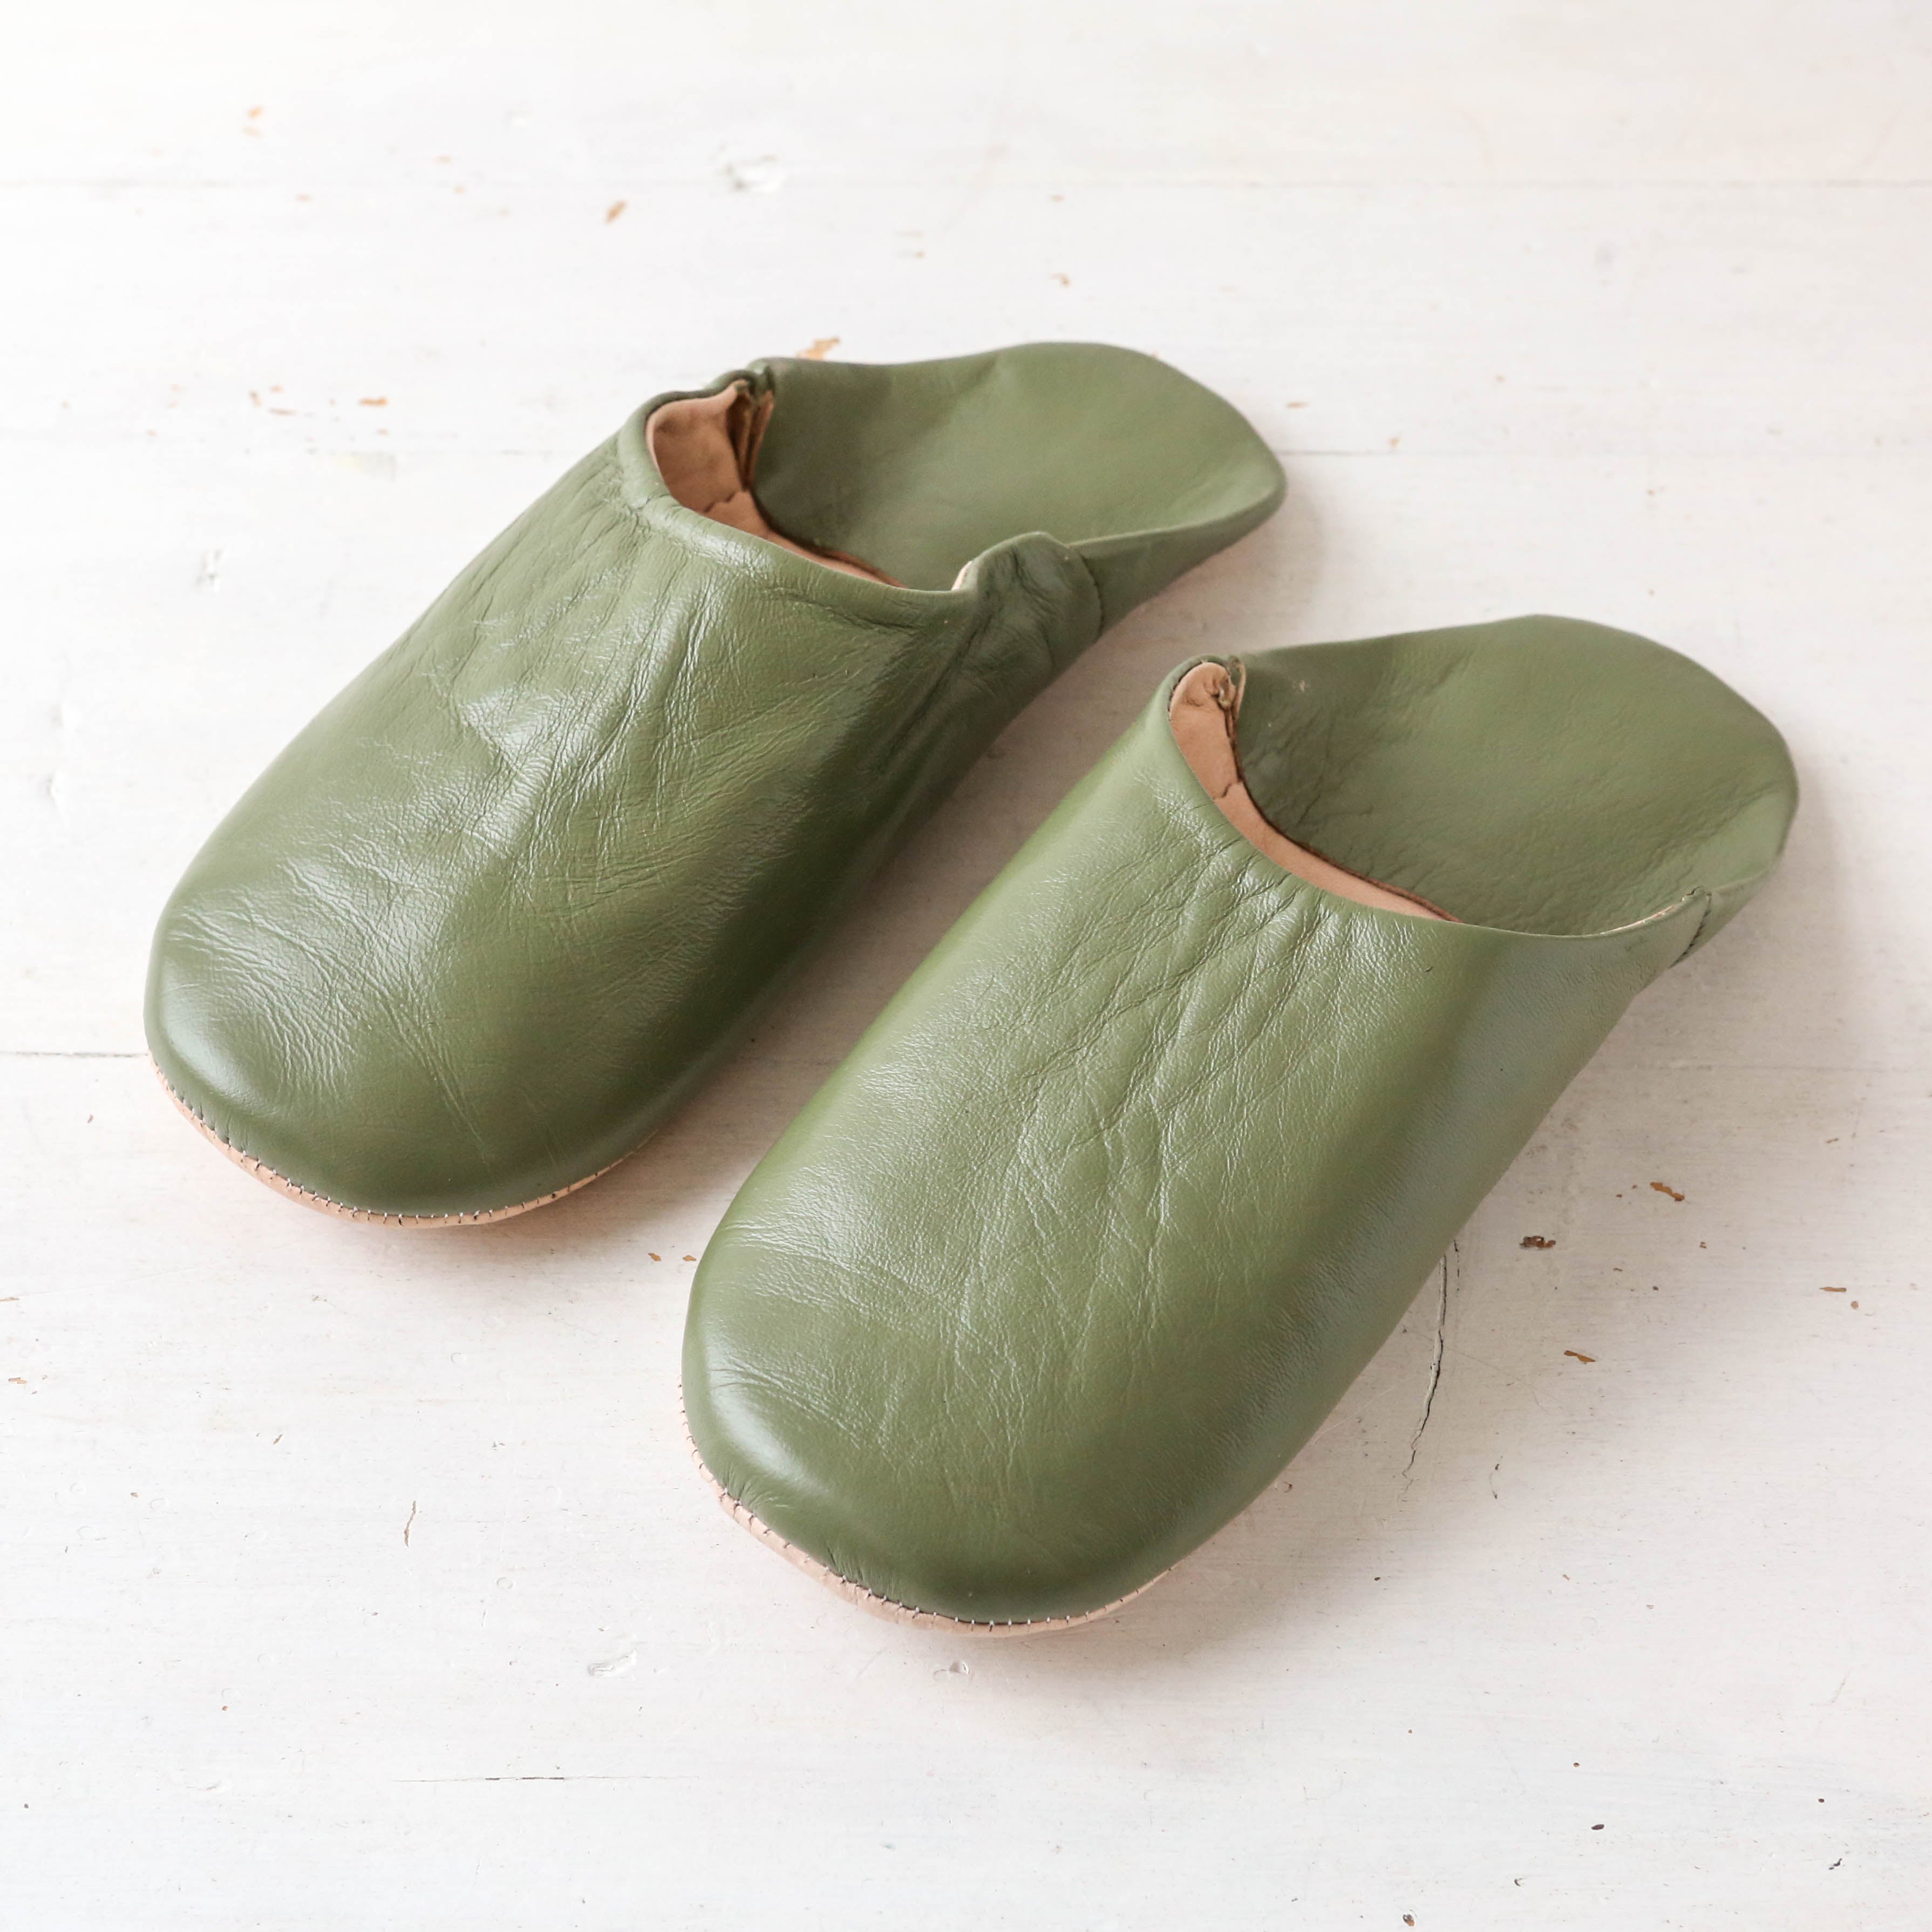 Bohemia Moroccan Leather Babouche Slippers - Olive